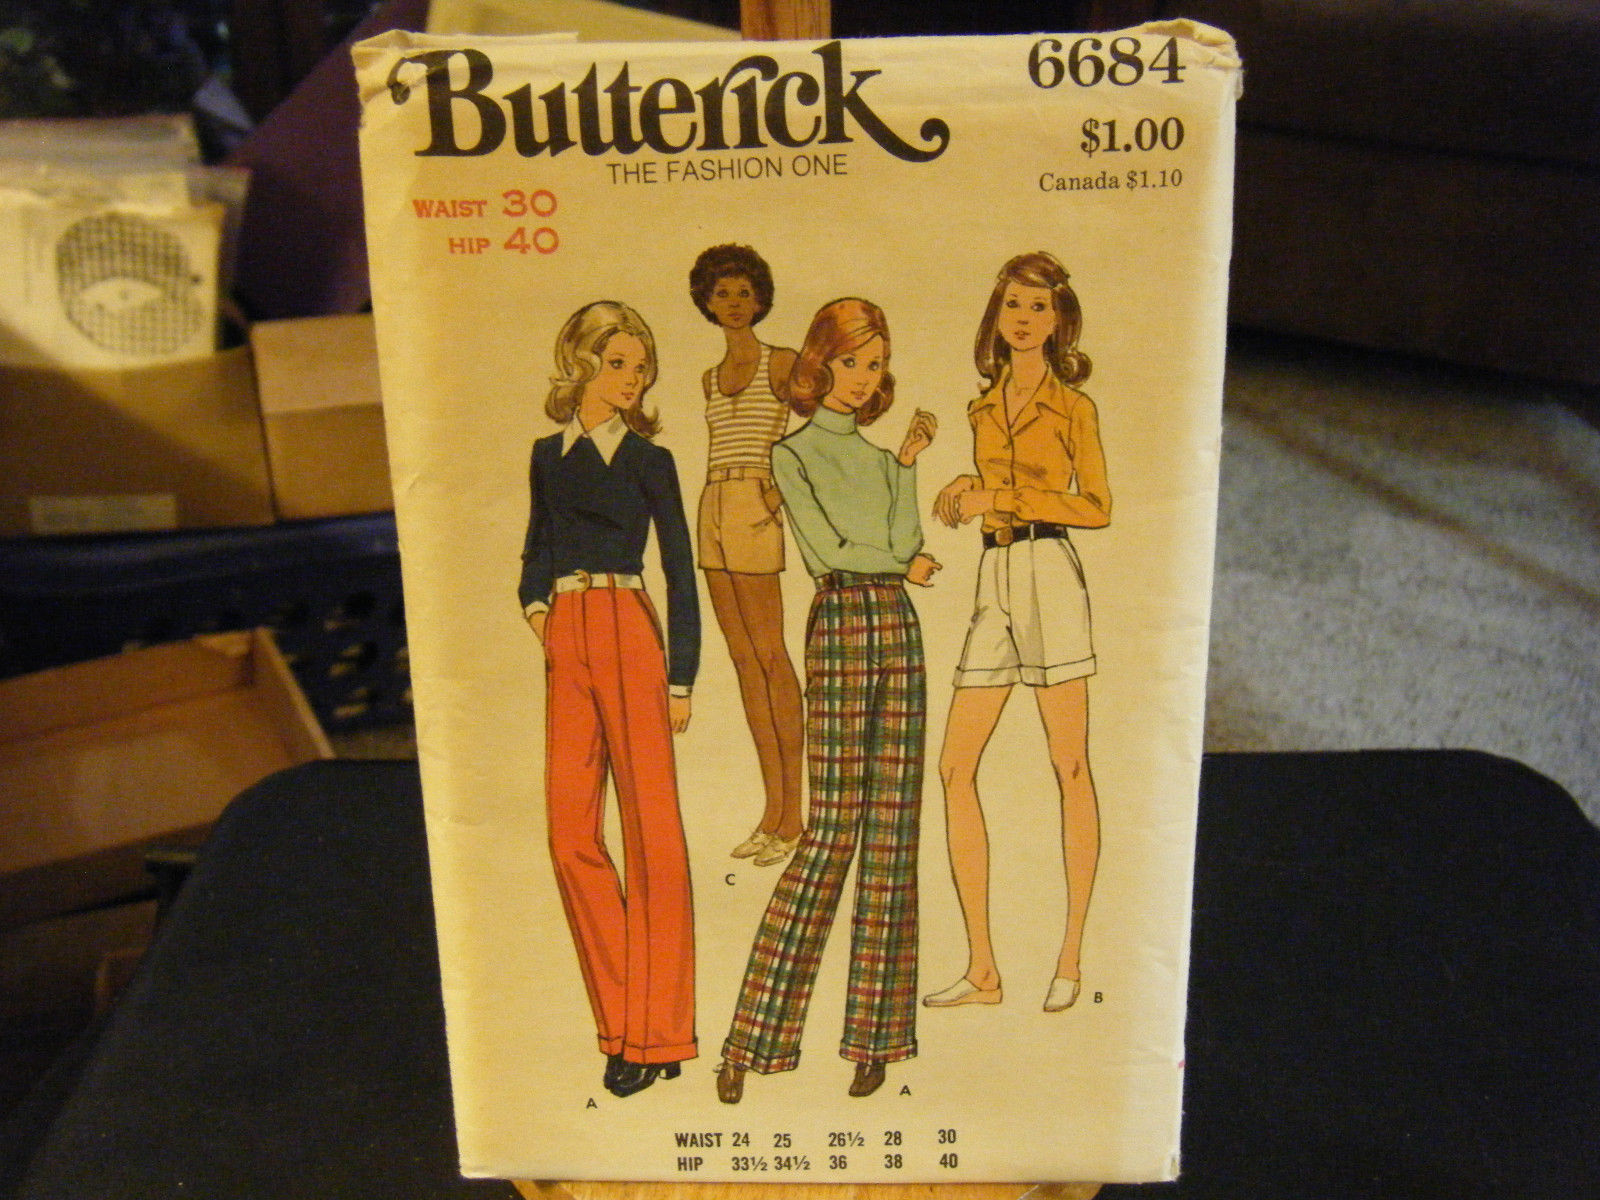 Primary image for Butterick 6684 Misses Pants or Shorts Pattern - Waist Size 30 Hip 40